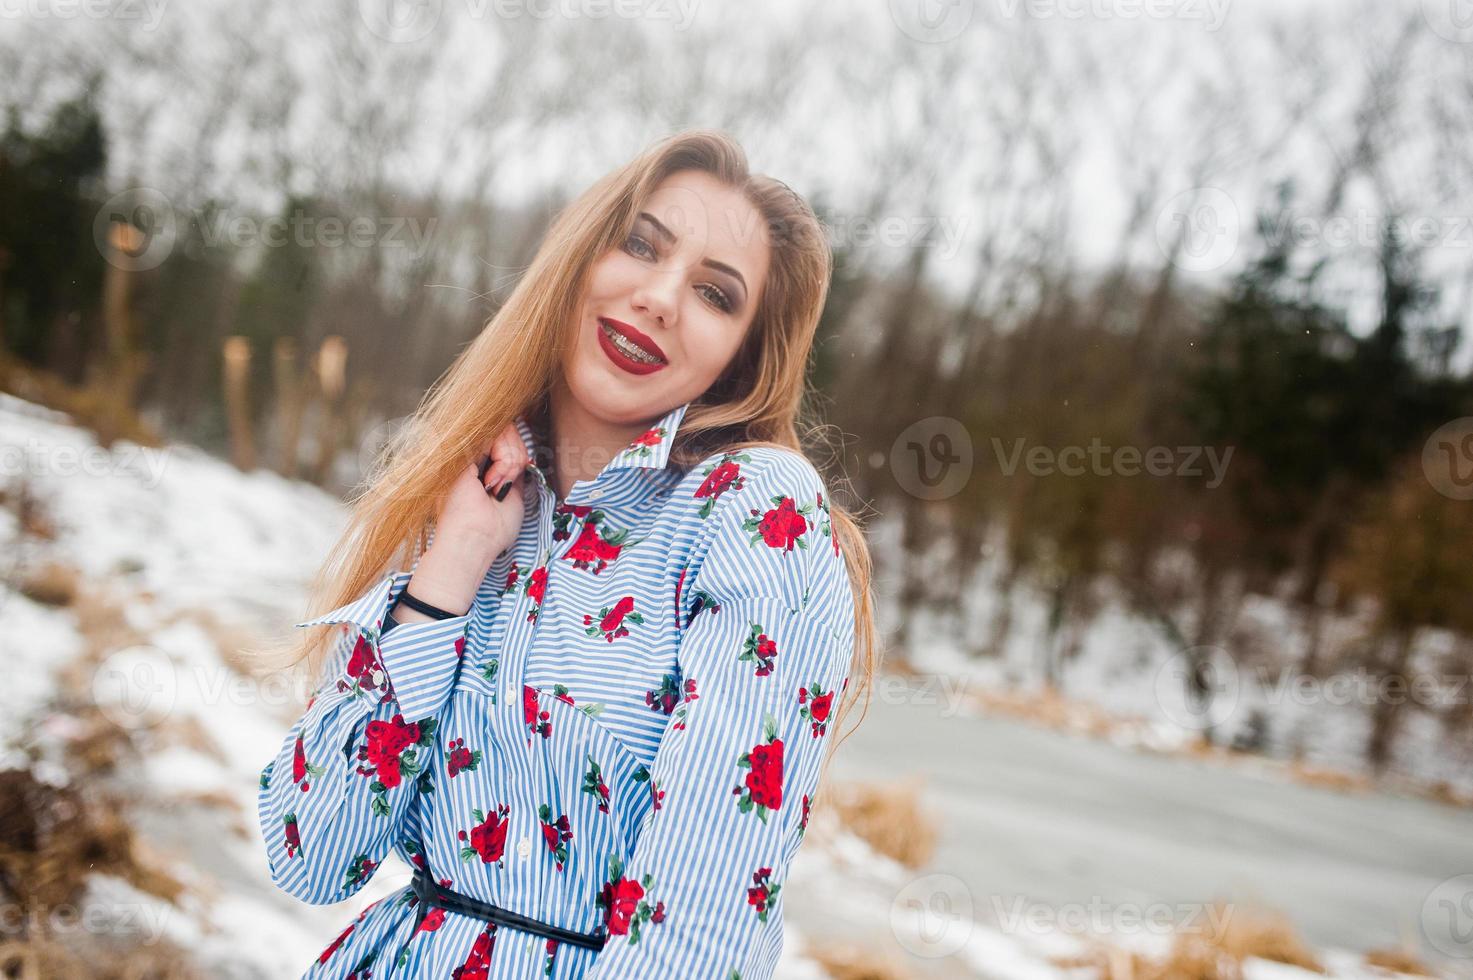 Girl with braces at winter day against frozen lake. photo